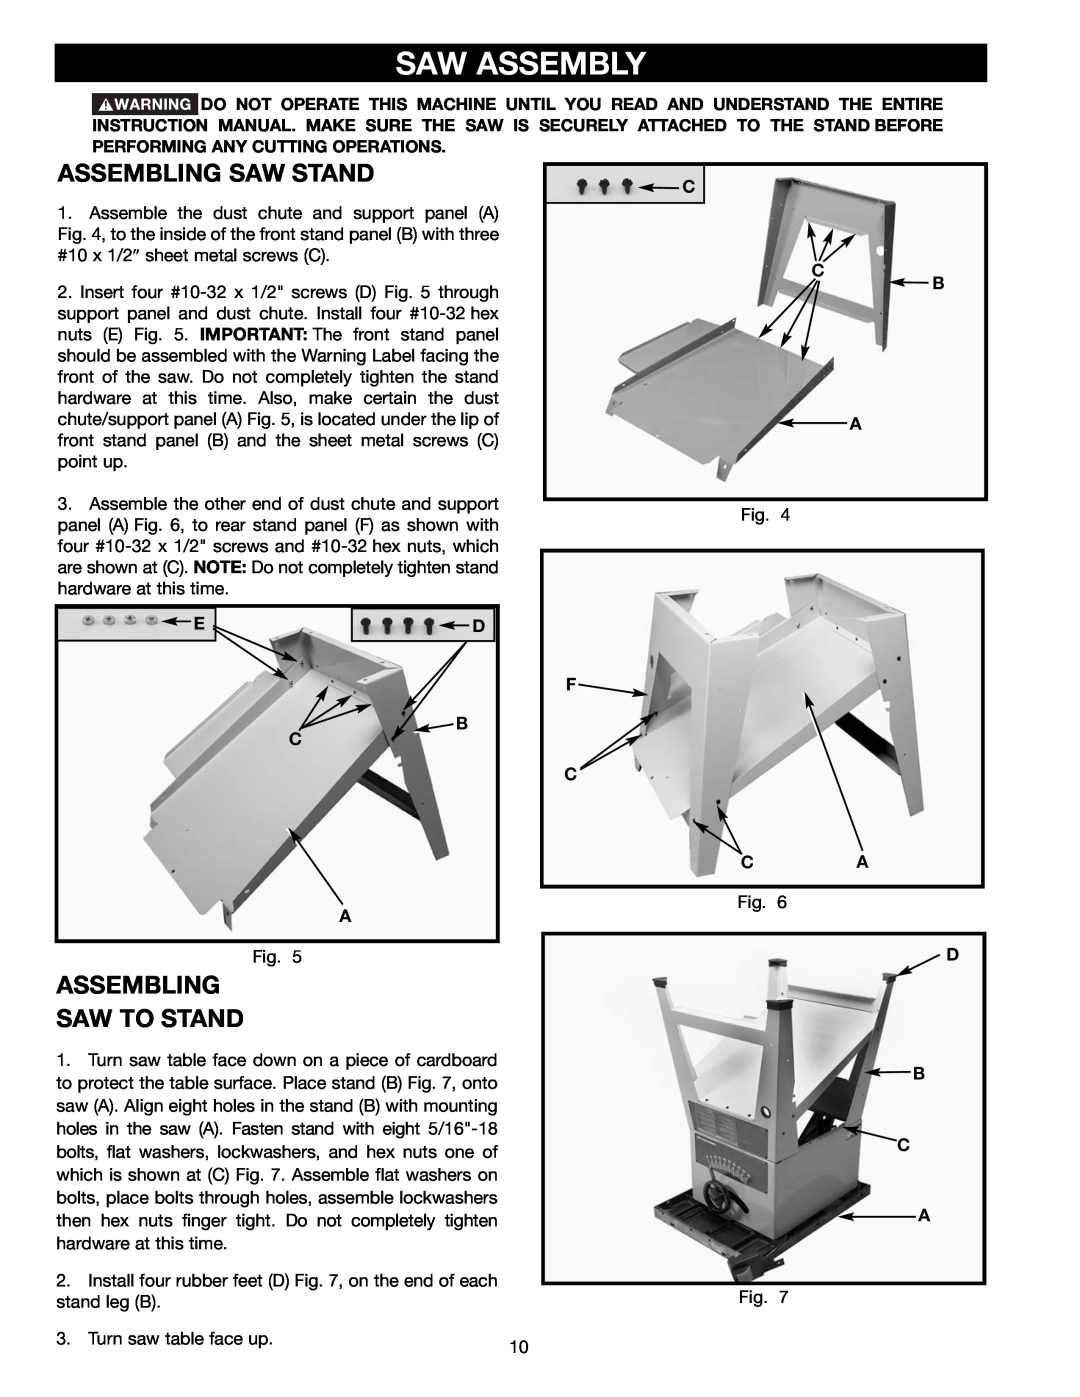 Delta 36-465 instruction manual Saw Assembly, Assembling Saw Stand, Assembling Saw To Stand, C C B A, F C Ca, D B C A 